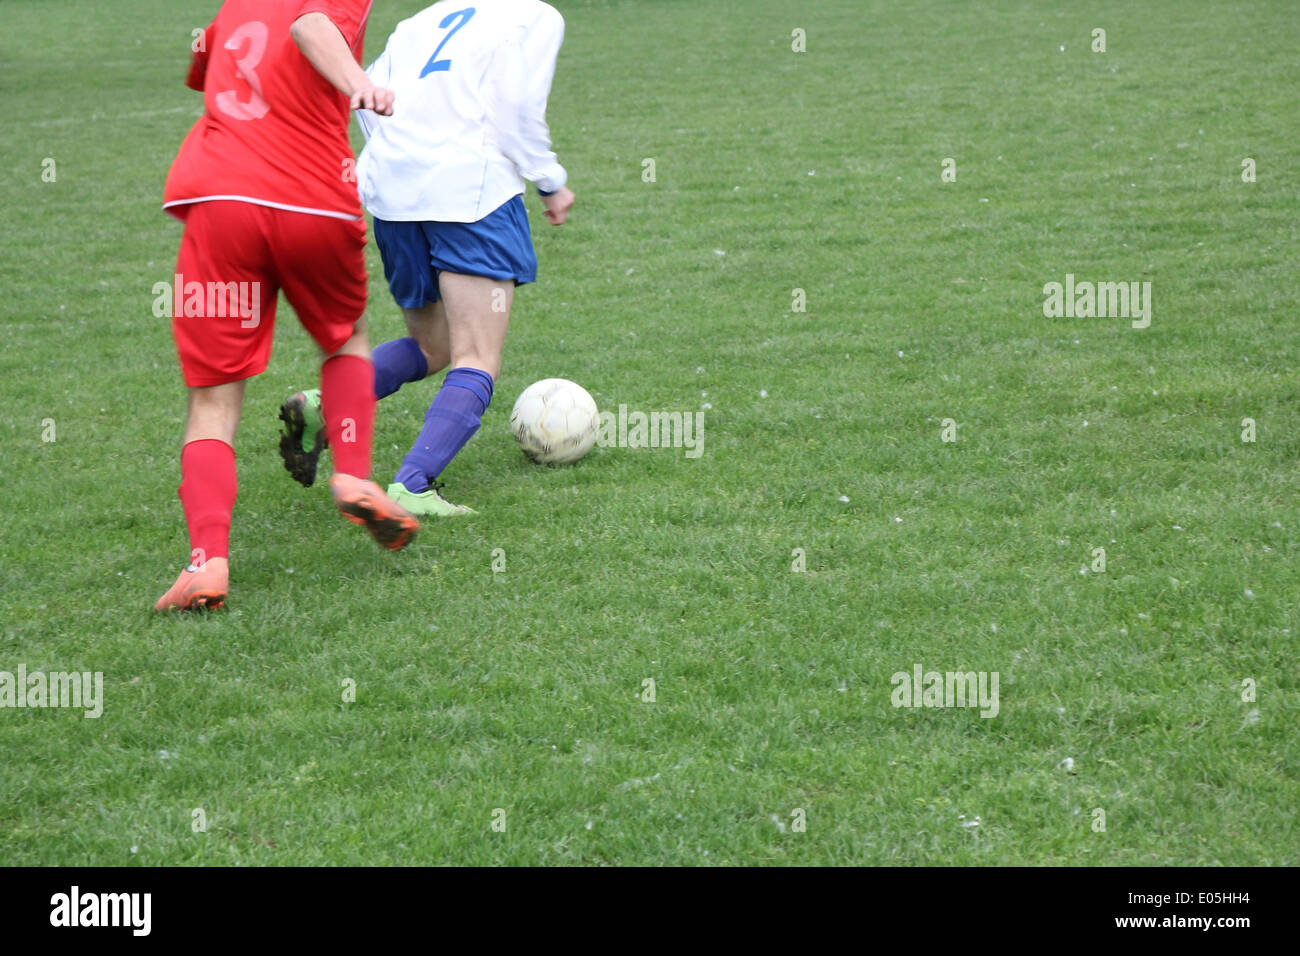 Soccer or football players in action on the field Stock Photo